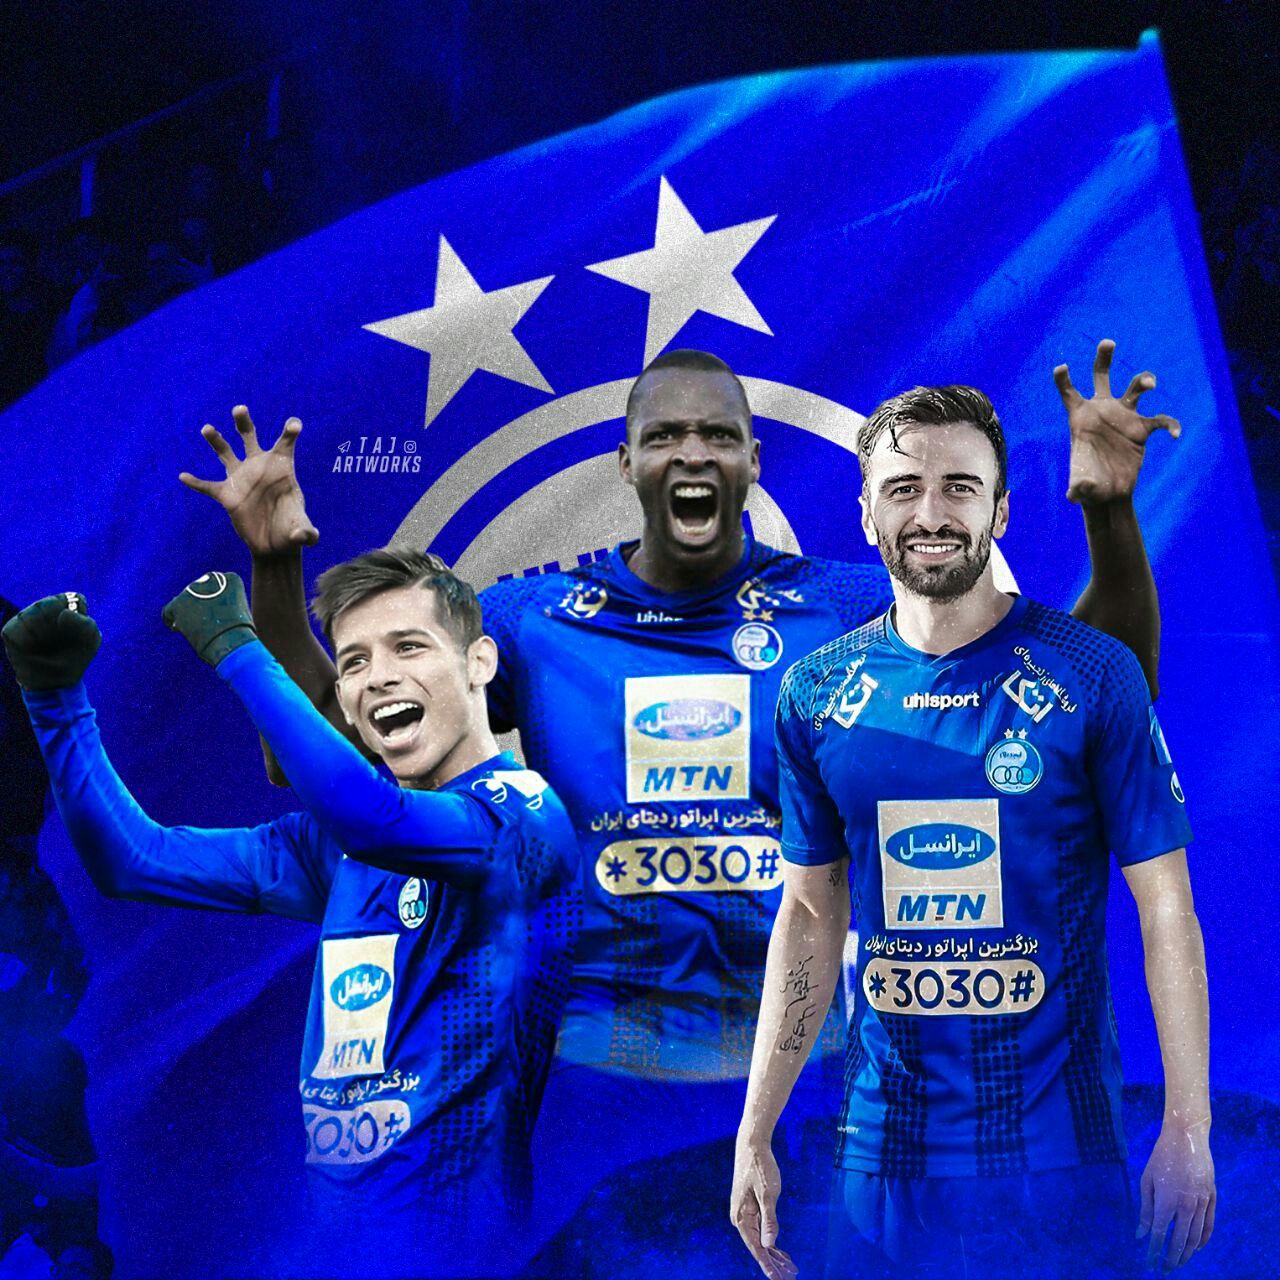 Esteghlal F.C. Wallpapers